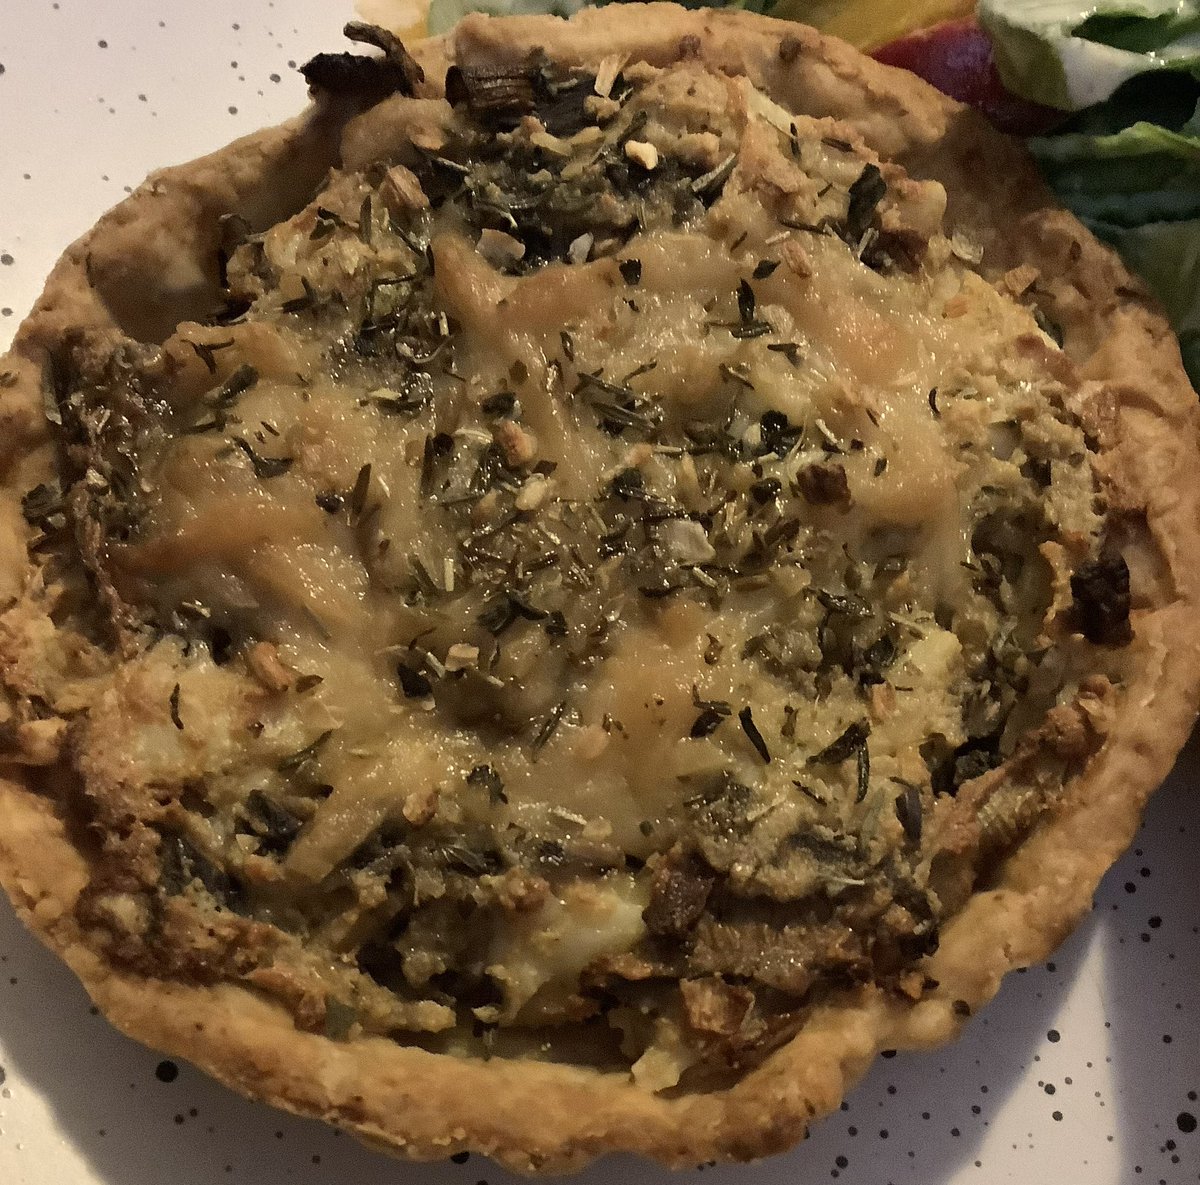 Vegan mushroom and leek quiche, using tofu instead of eggs. Surprised at how well they turned out and how nice they tasted. Rather rustic though, so wouldn’t pass muster on @BakeOffAU